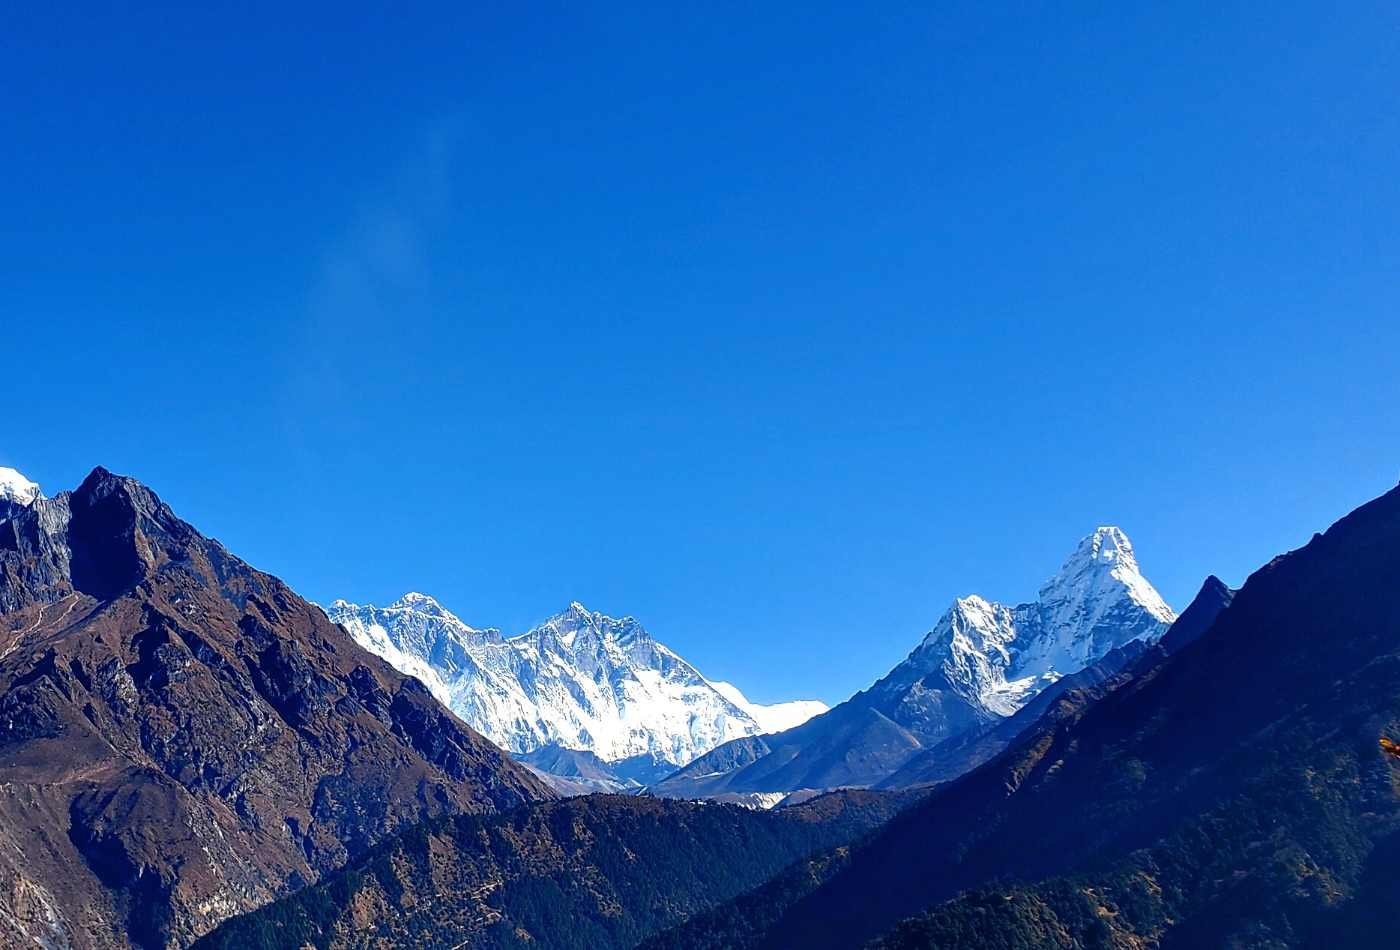  A stunning view of Cholatse Peak from Dzongla, with clear blue skies and snowy peaks. The rocky terrain and green grass in the forehand. 